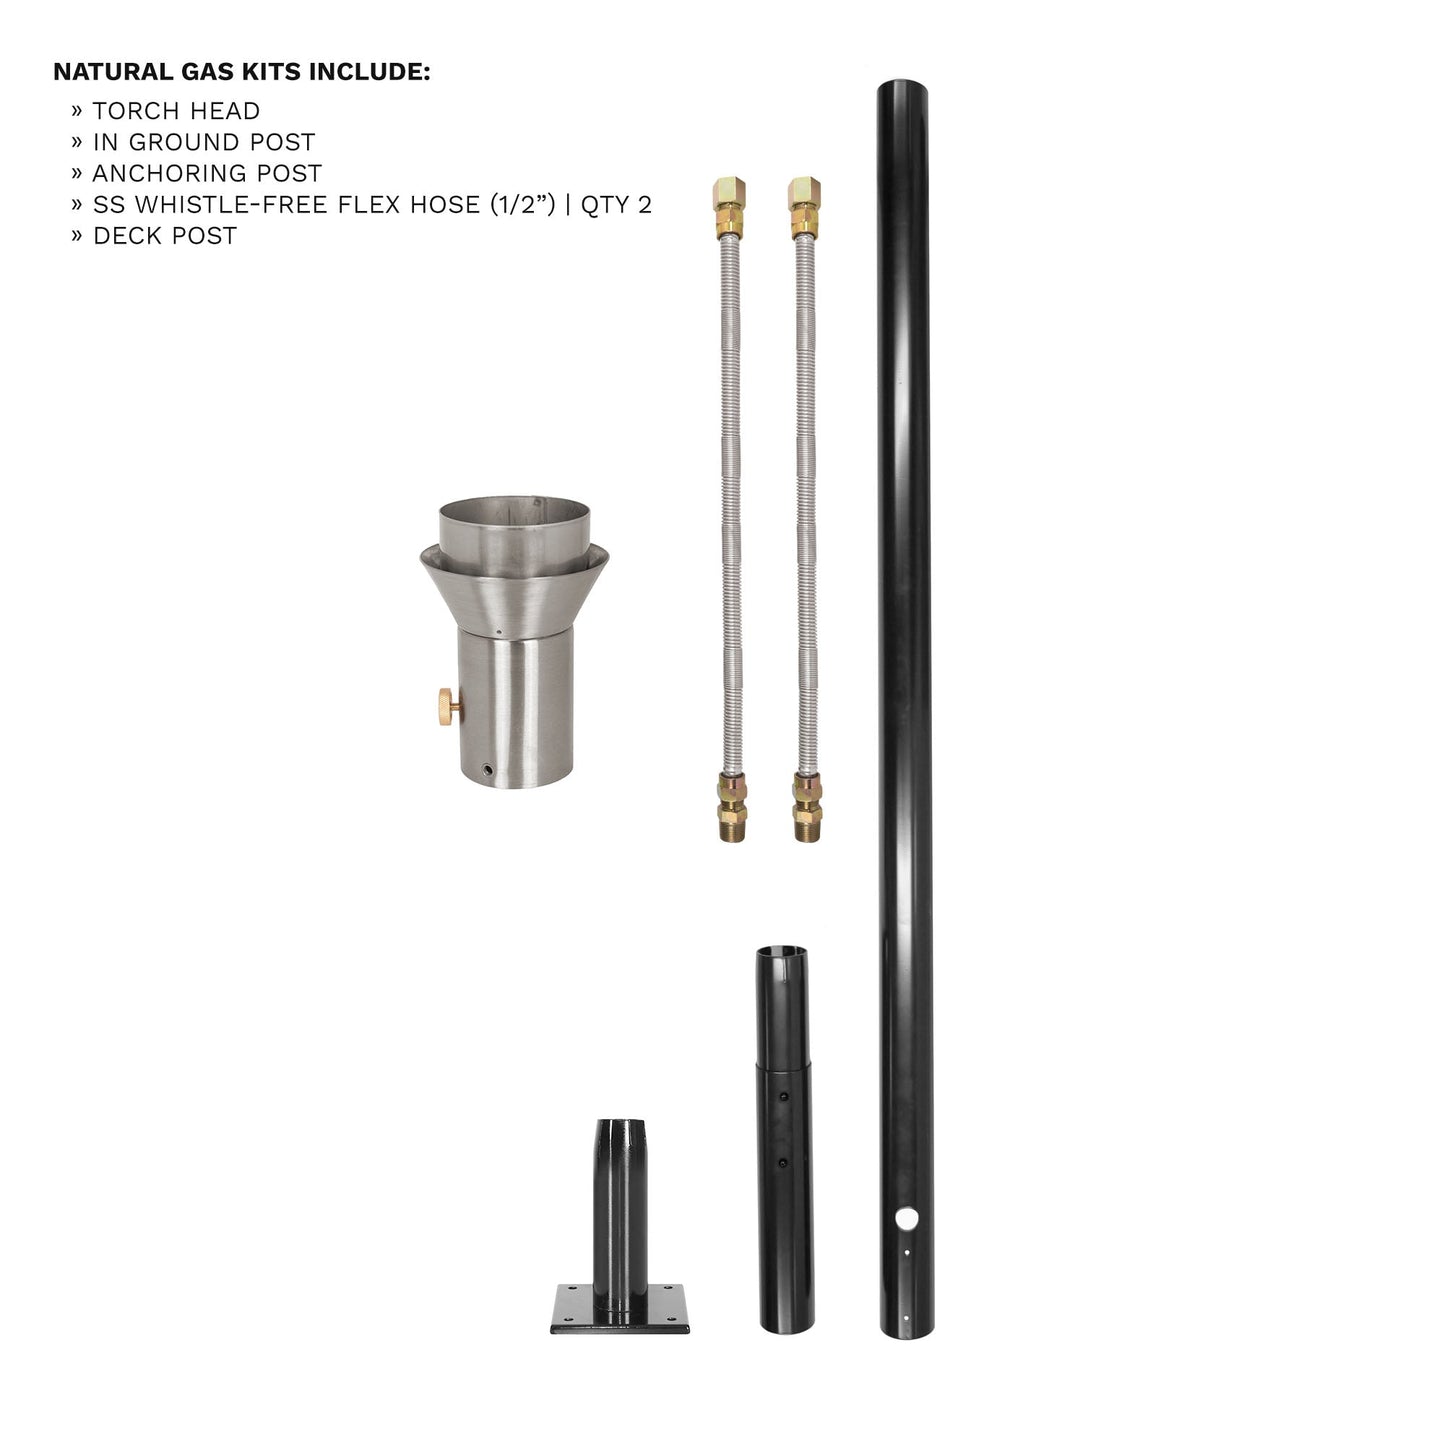 Diamond Original TOP Torch & Post Complete Kit - Stainless Steel - Natural Gas-Novel Home